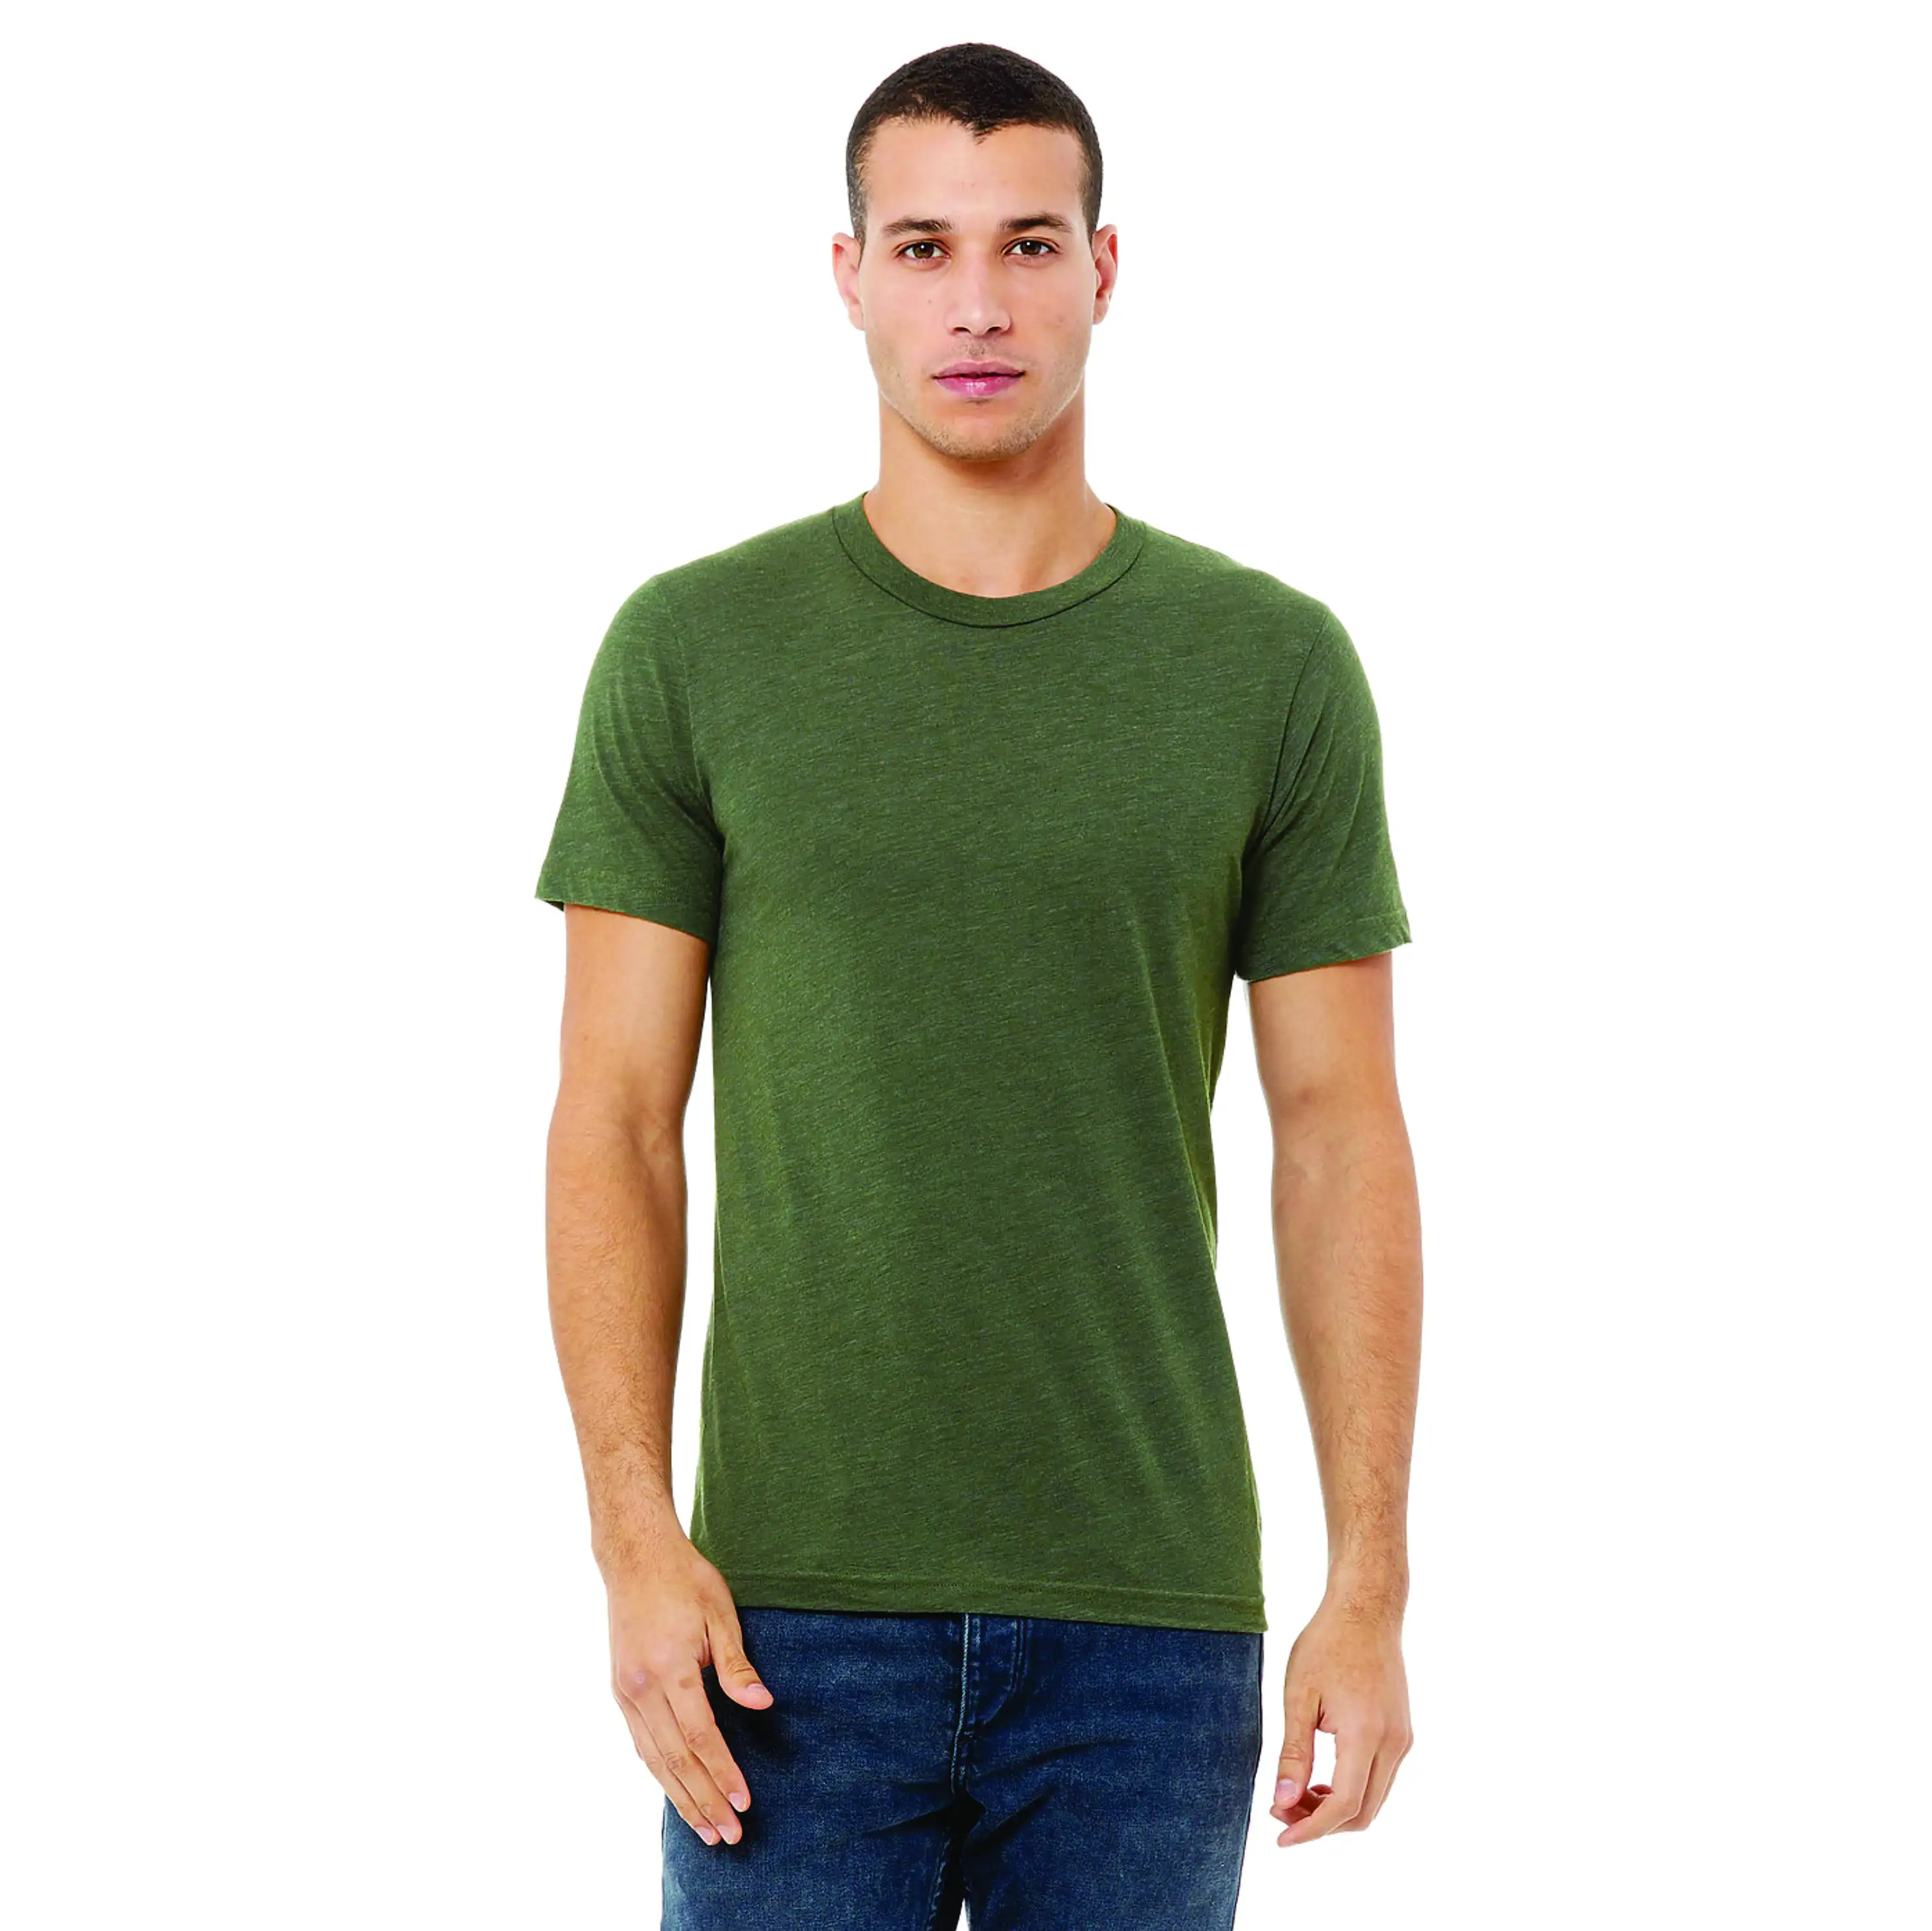 50% Poly 25% Airlume Combed and Ring Spun Cotton 25% Rayon 40 Single 3.8 oz Military Green Unisex Triblend Short Sleeves T-Shirt